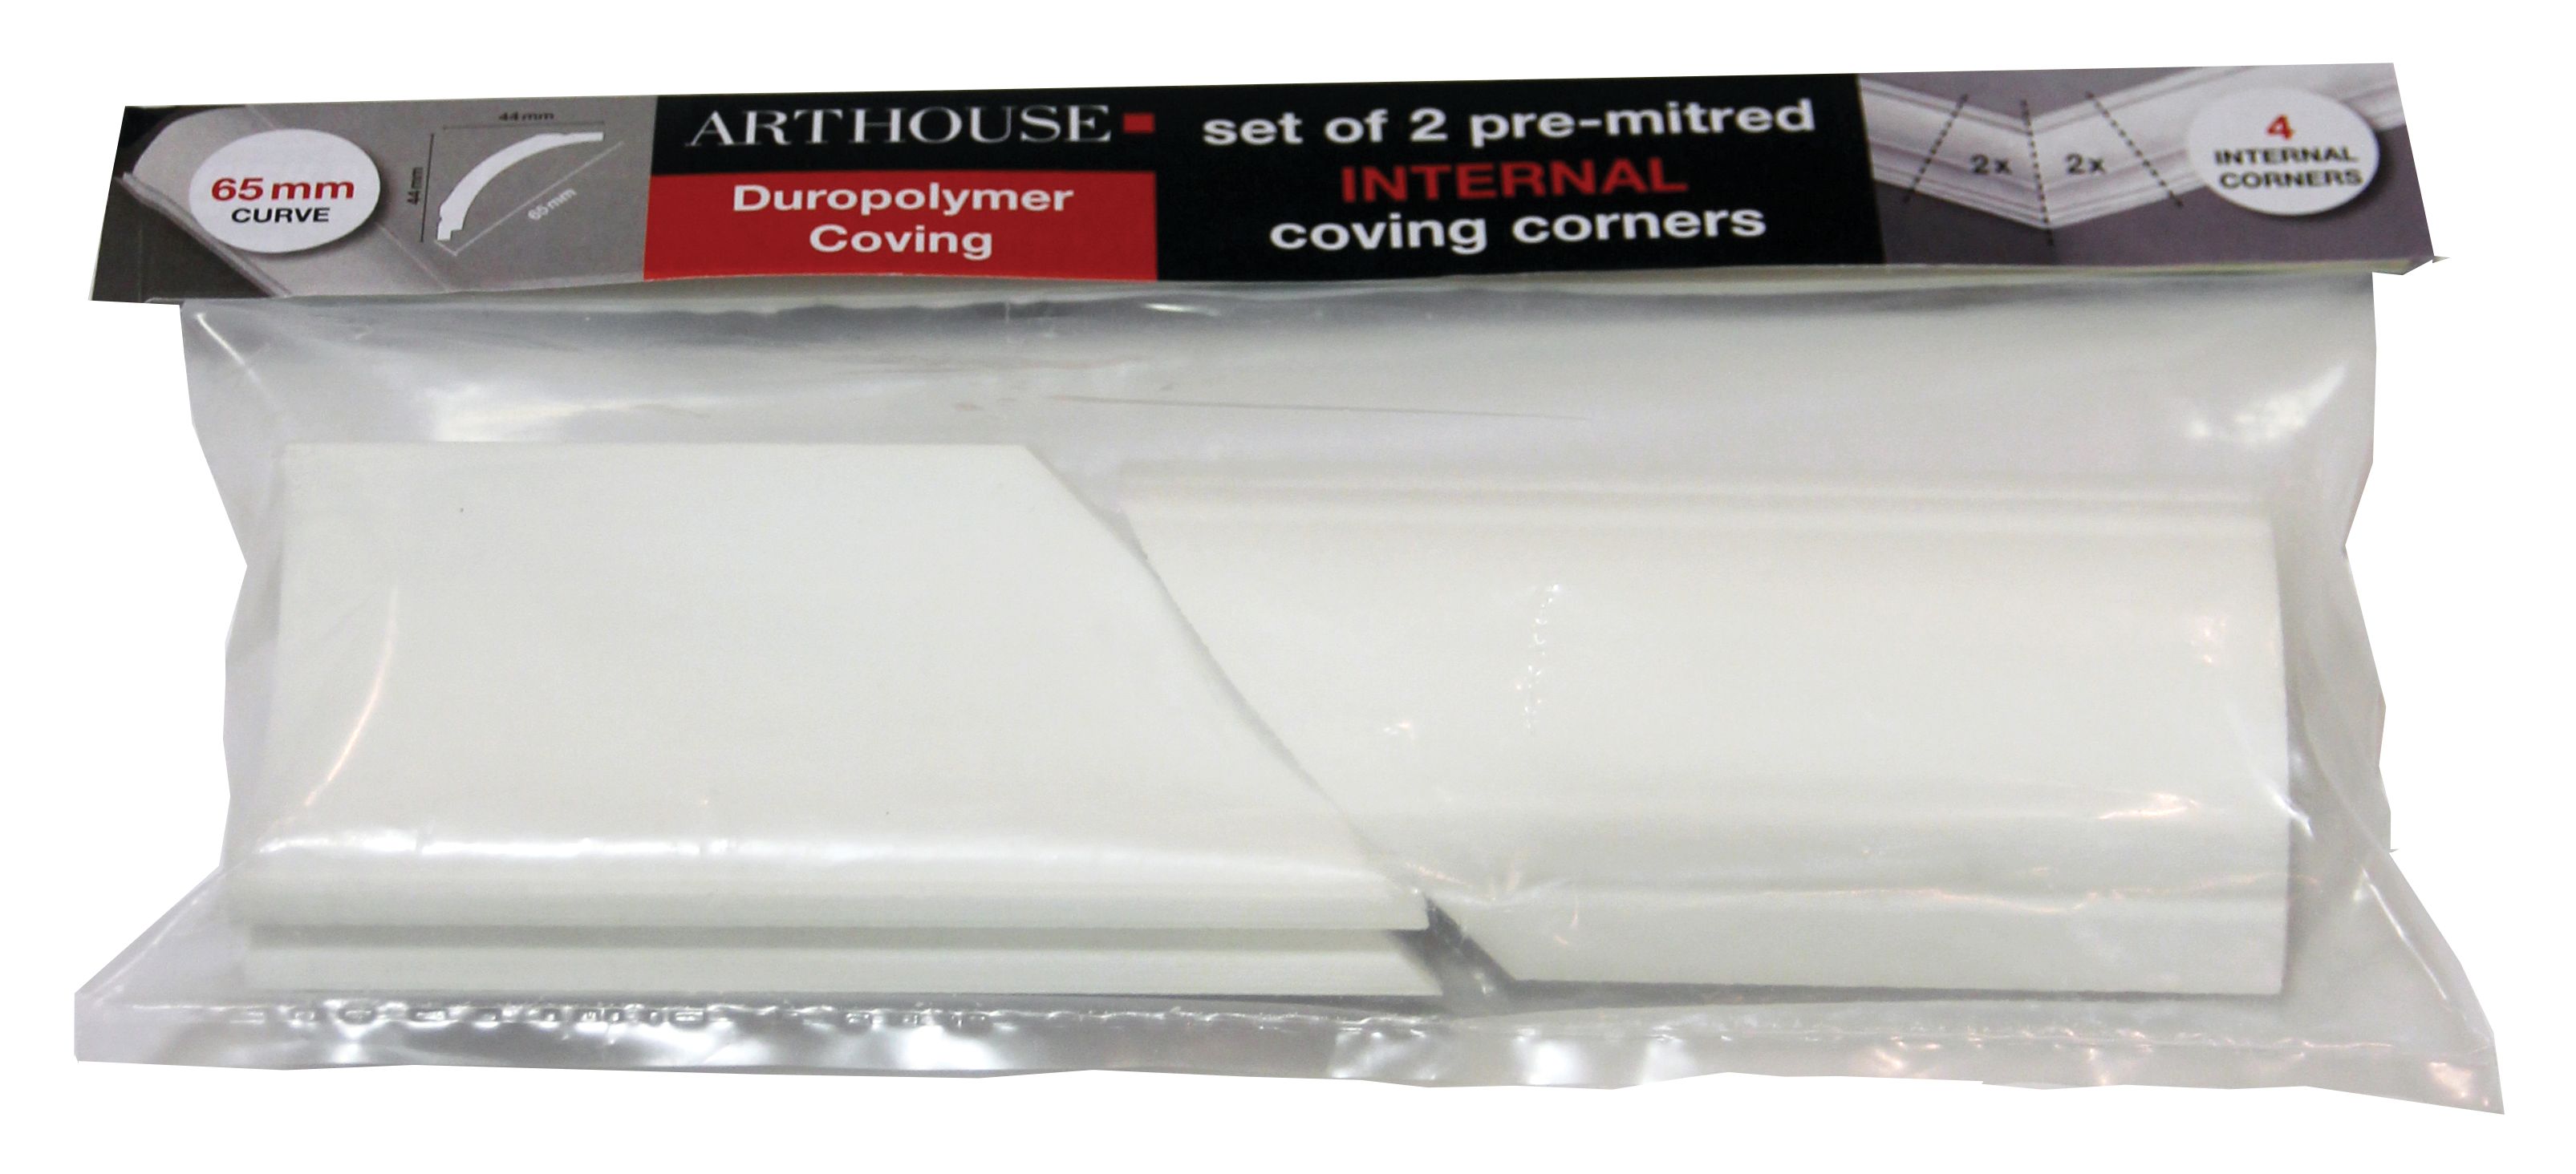 Image of Arthouse Duropolymer Coving Internal Corner - 65mm Pack of 2